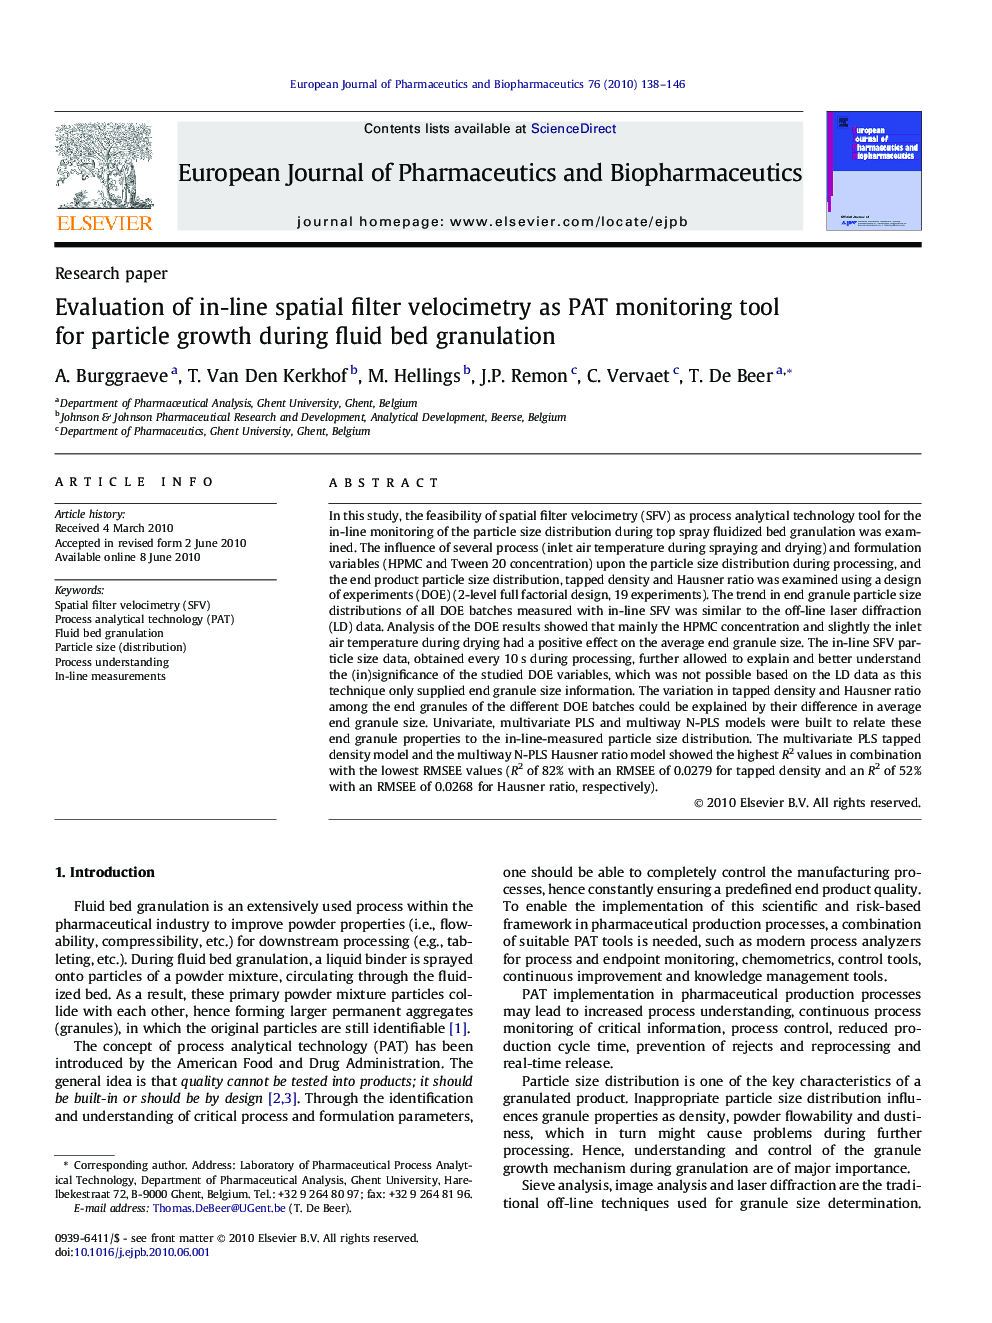 Evaluation of in-line spatial filter velocimetry as PAT monitoring tool for particle growth during fluid bed granulation